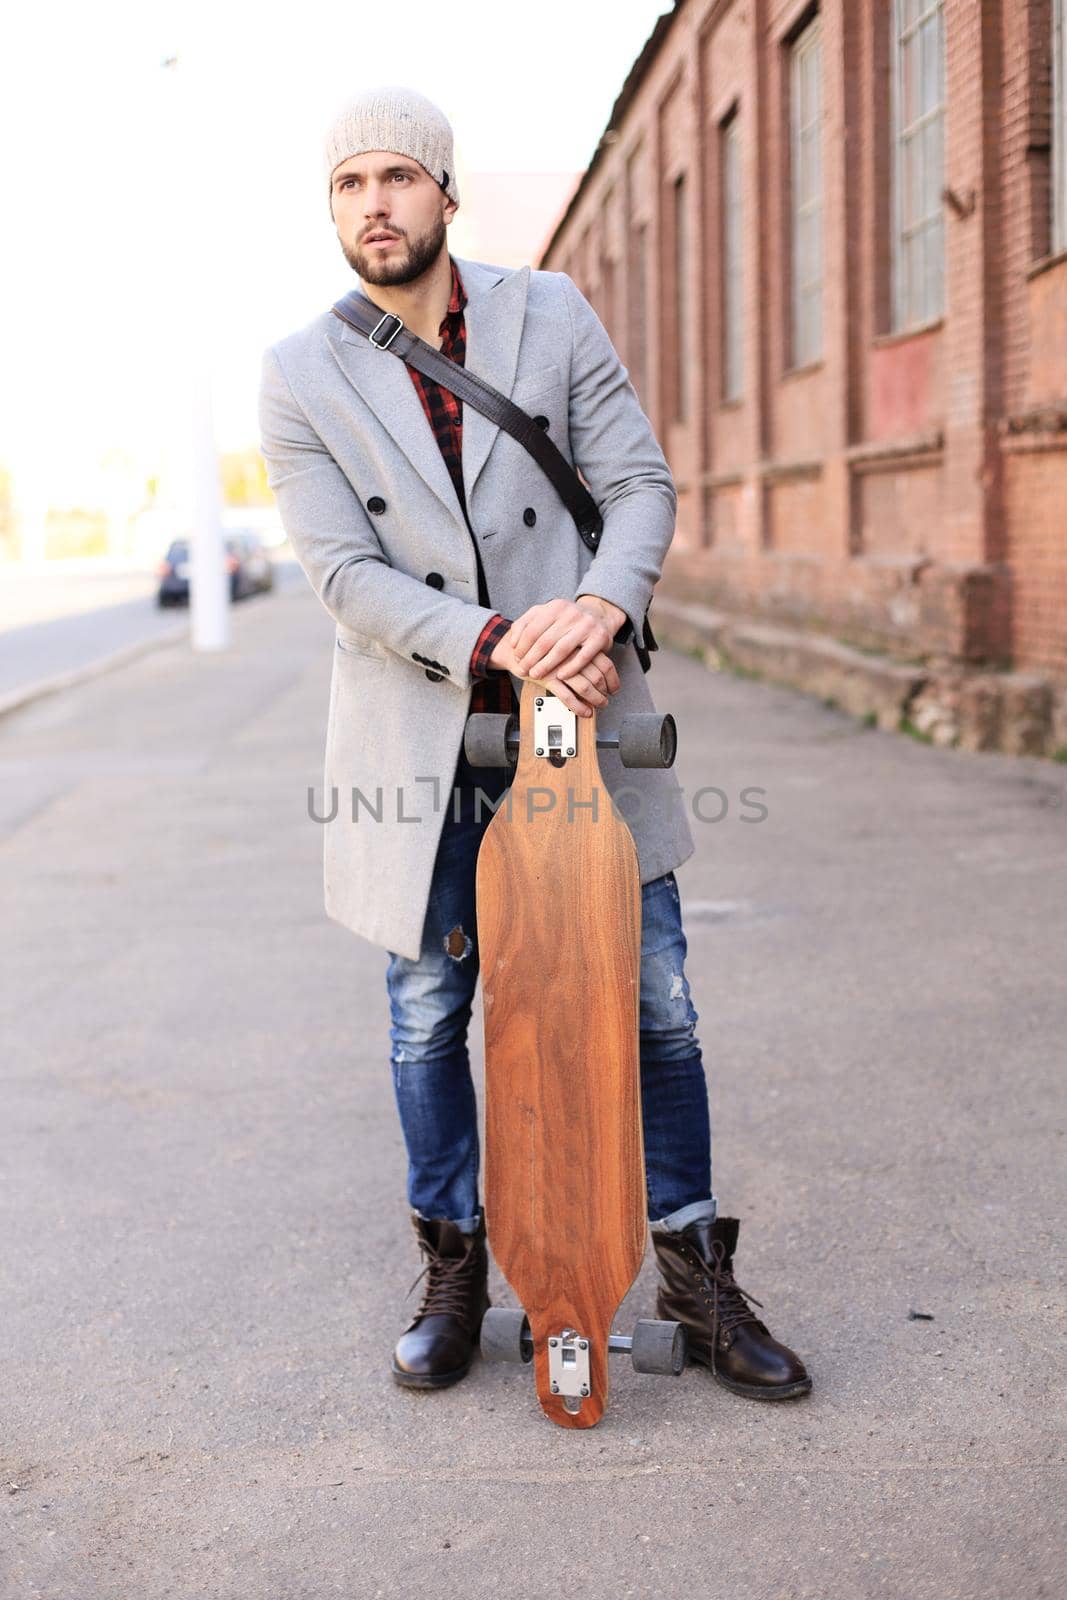 Handsome young man in grey coat and hat walking on the street, using longboard. by tsyhun